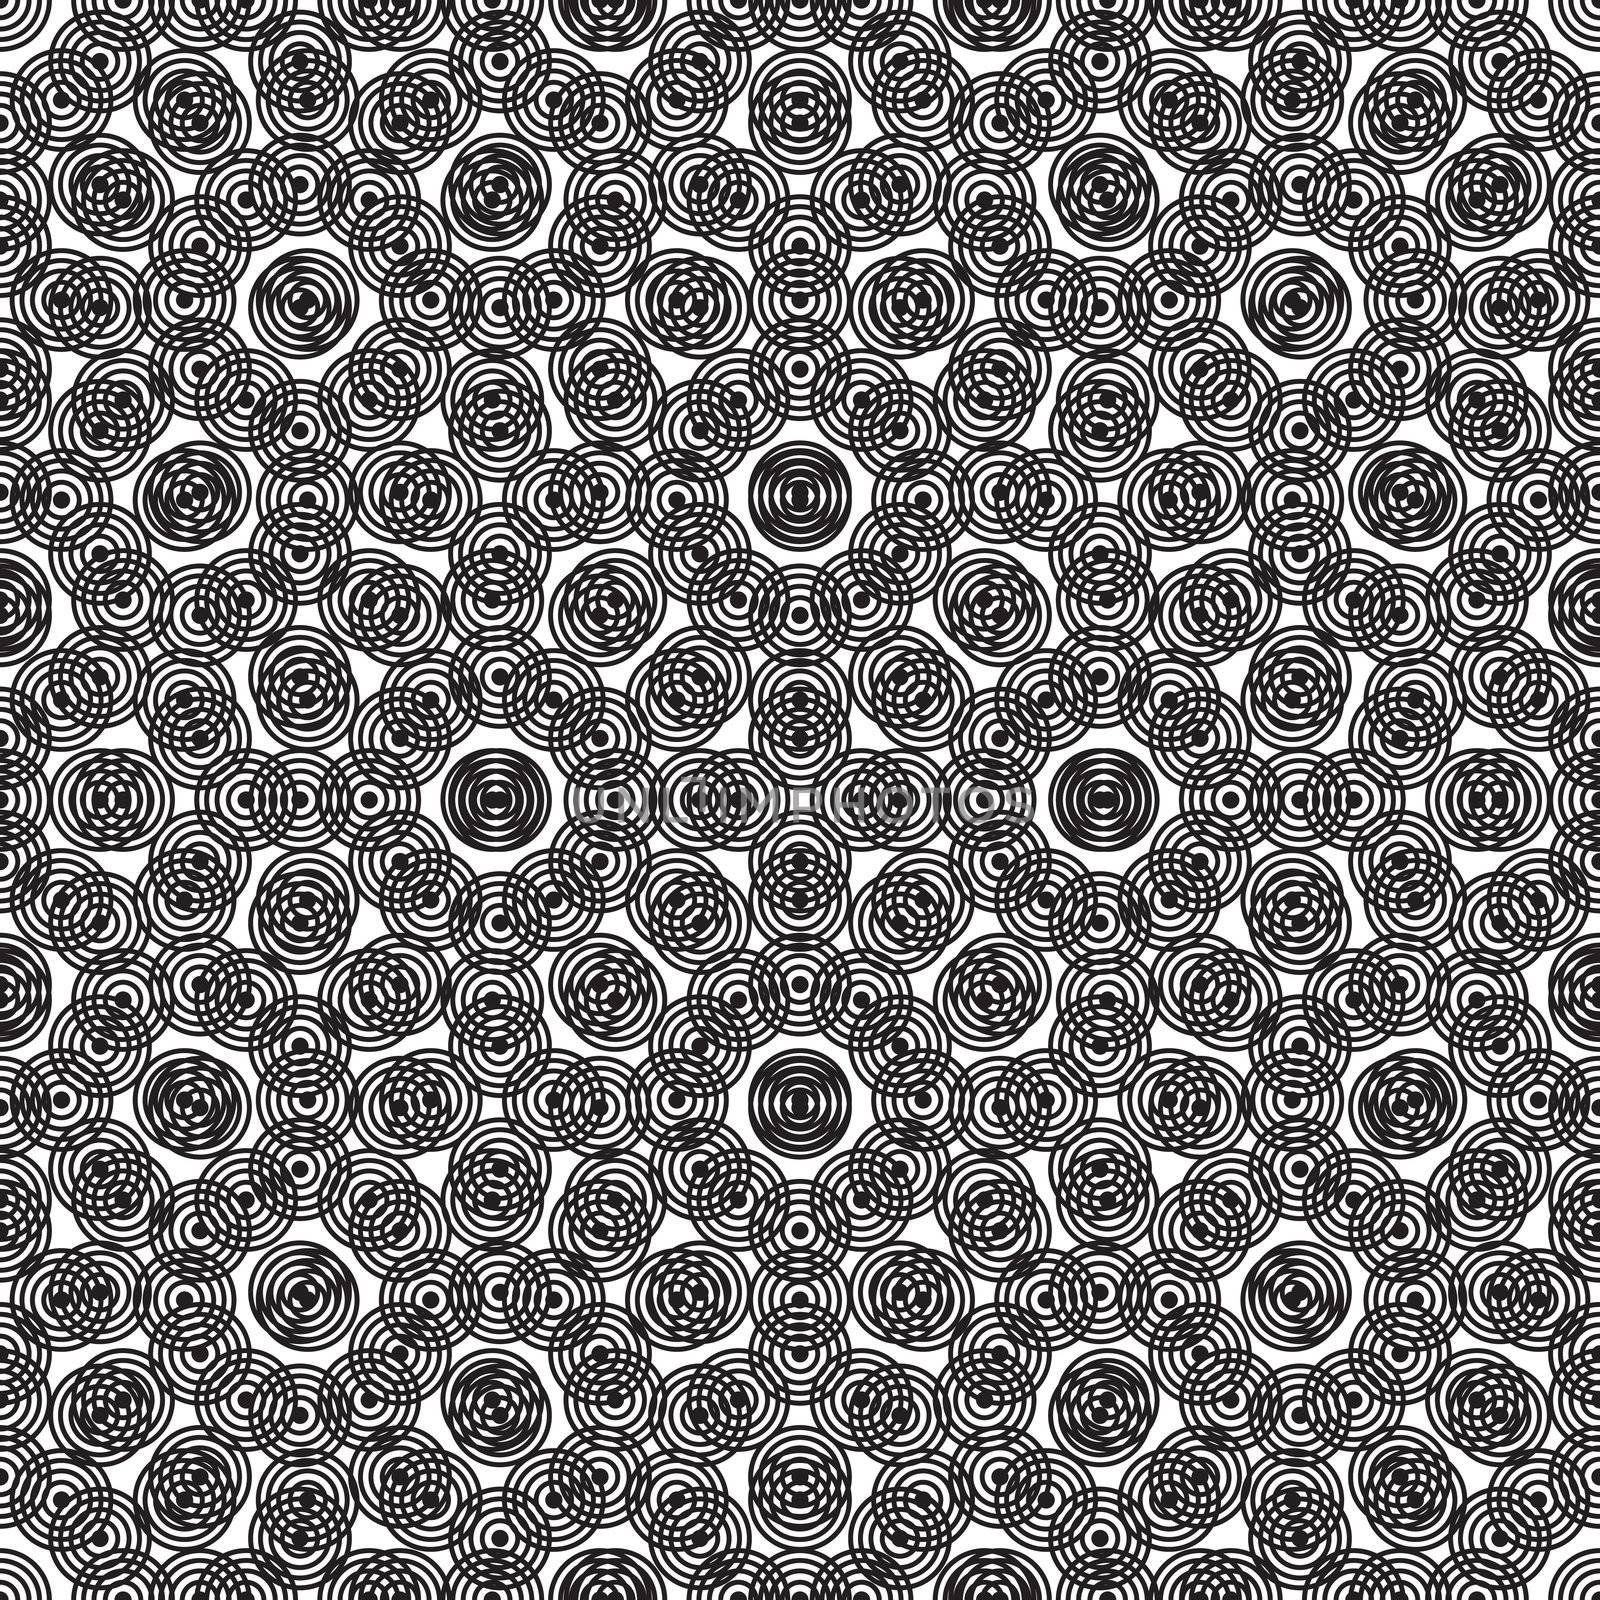 Abstract black and white circular background pattern illustrated